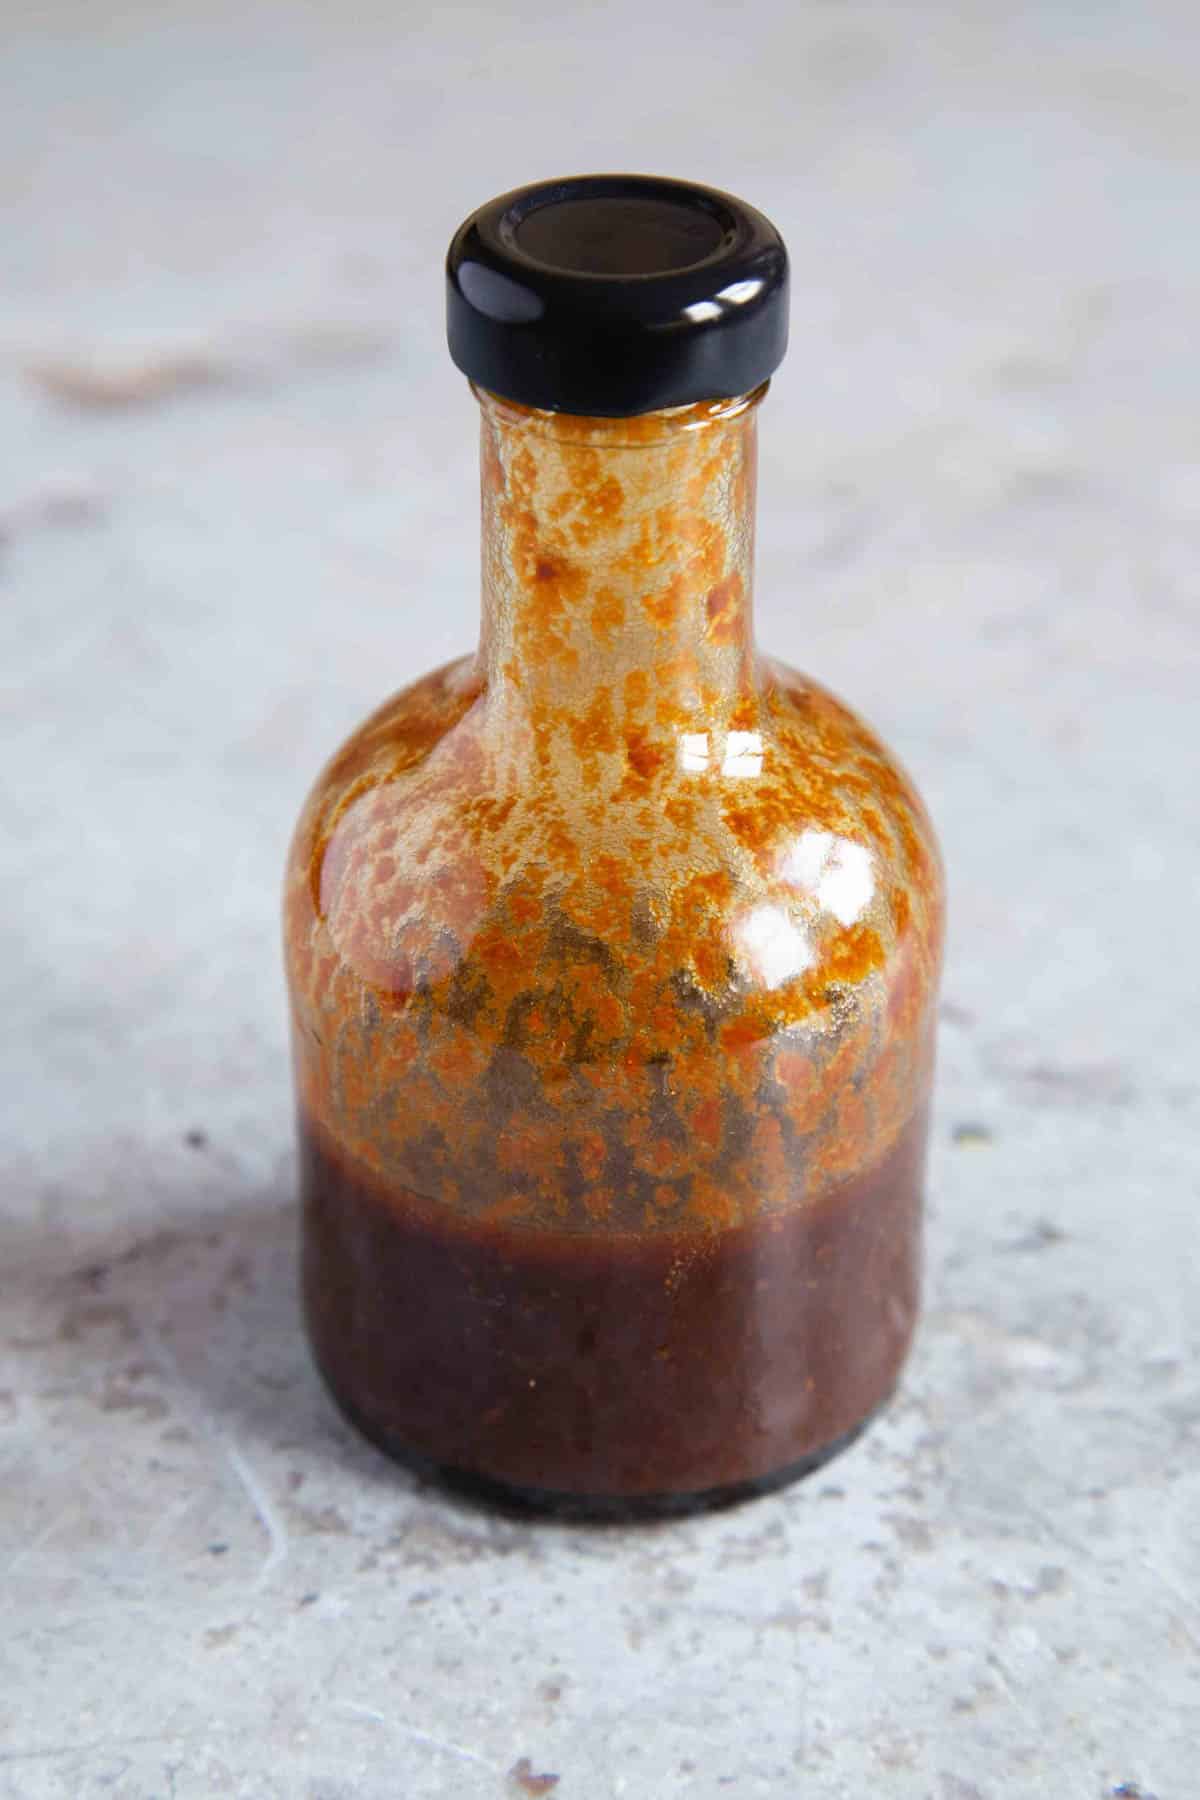 The dressing transferred to a bottle to serve.